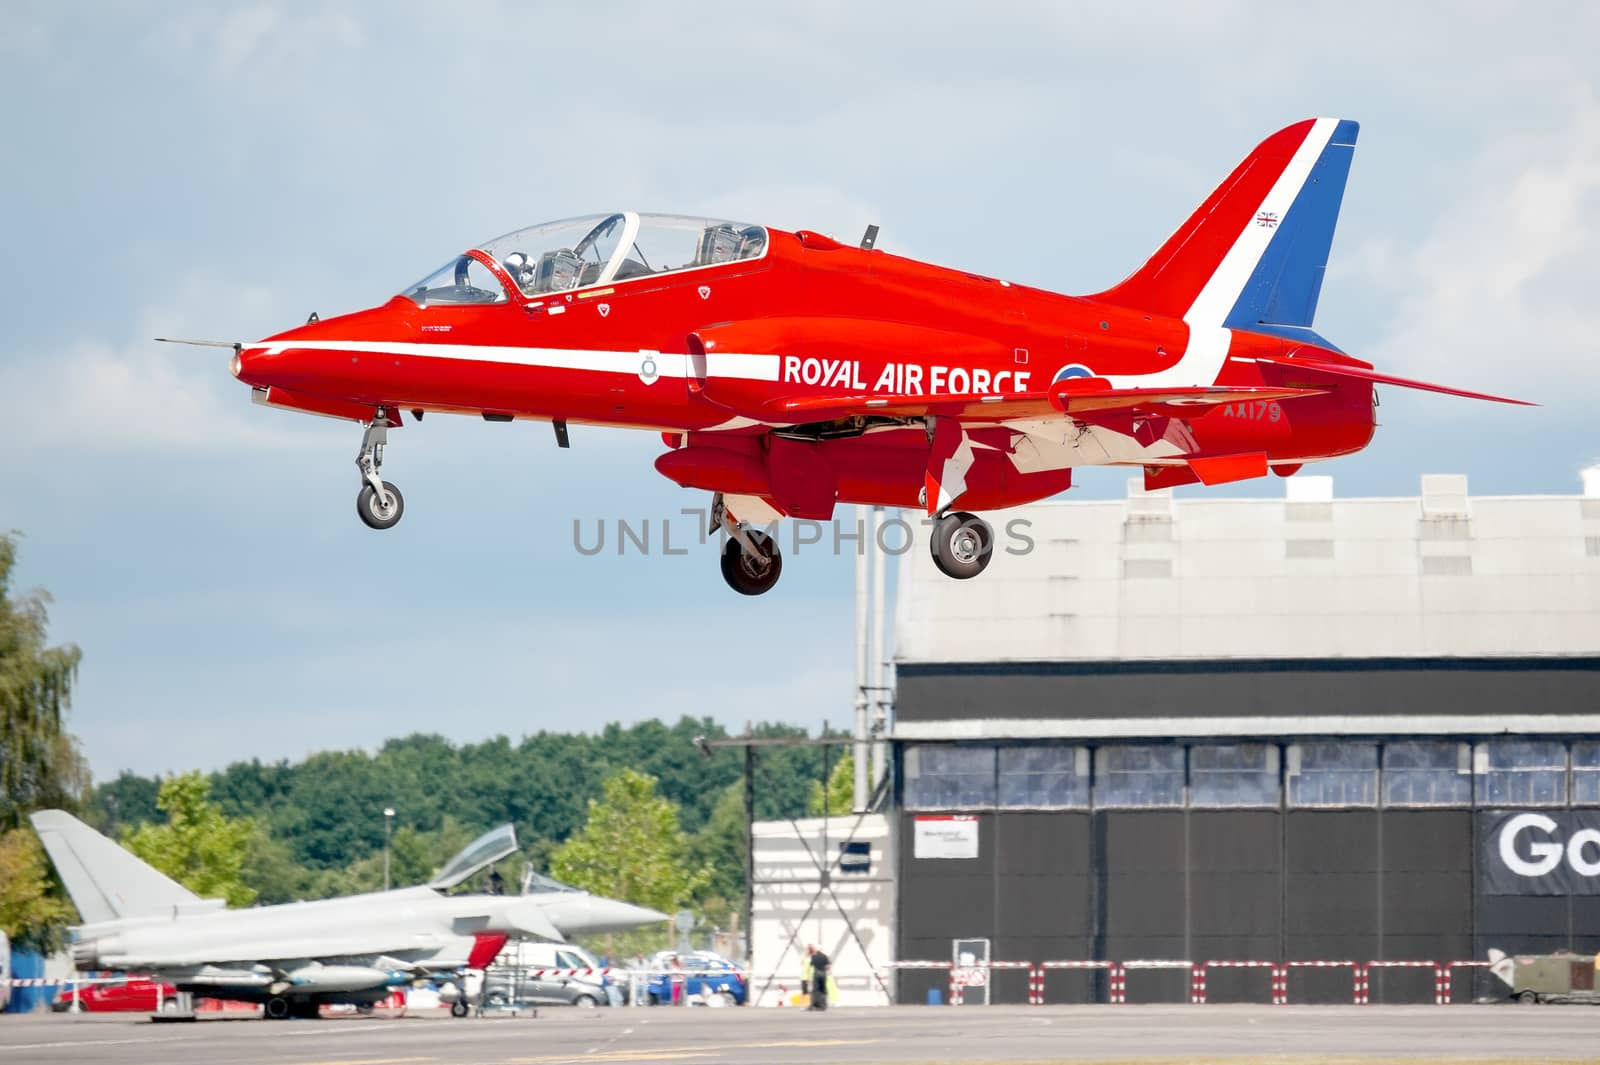 Farnborough, UK - July 25, 2010: Close-up of a Red Arrows display jet landing with a Eurofighter in the background at the Farnborough Airshow, UK